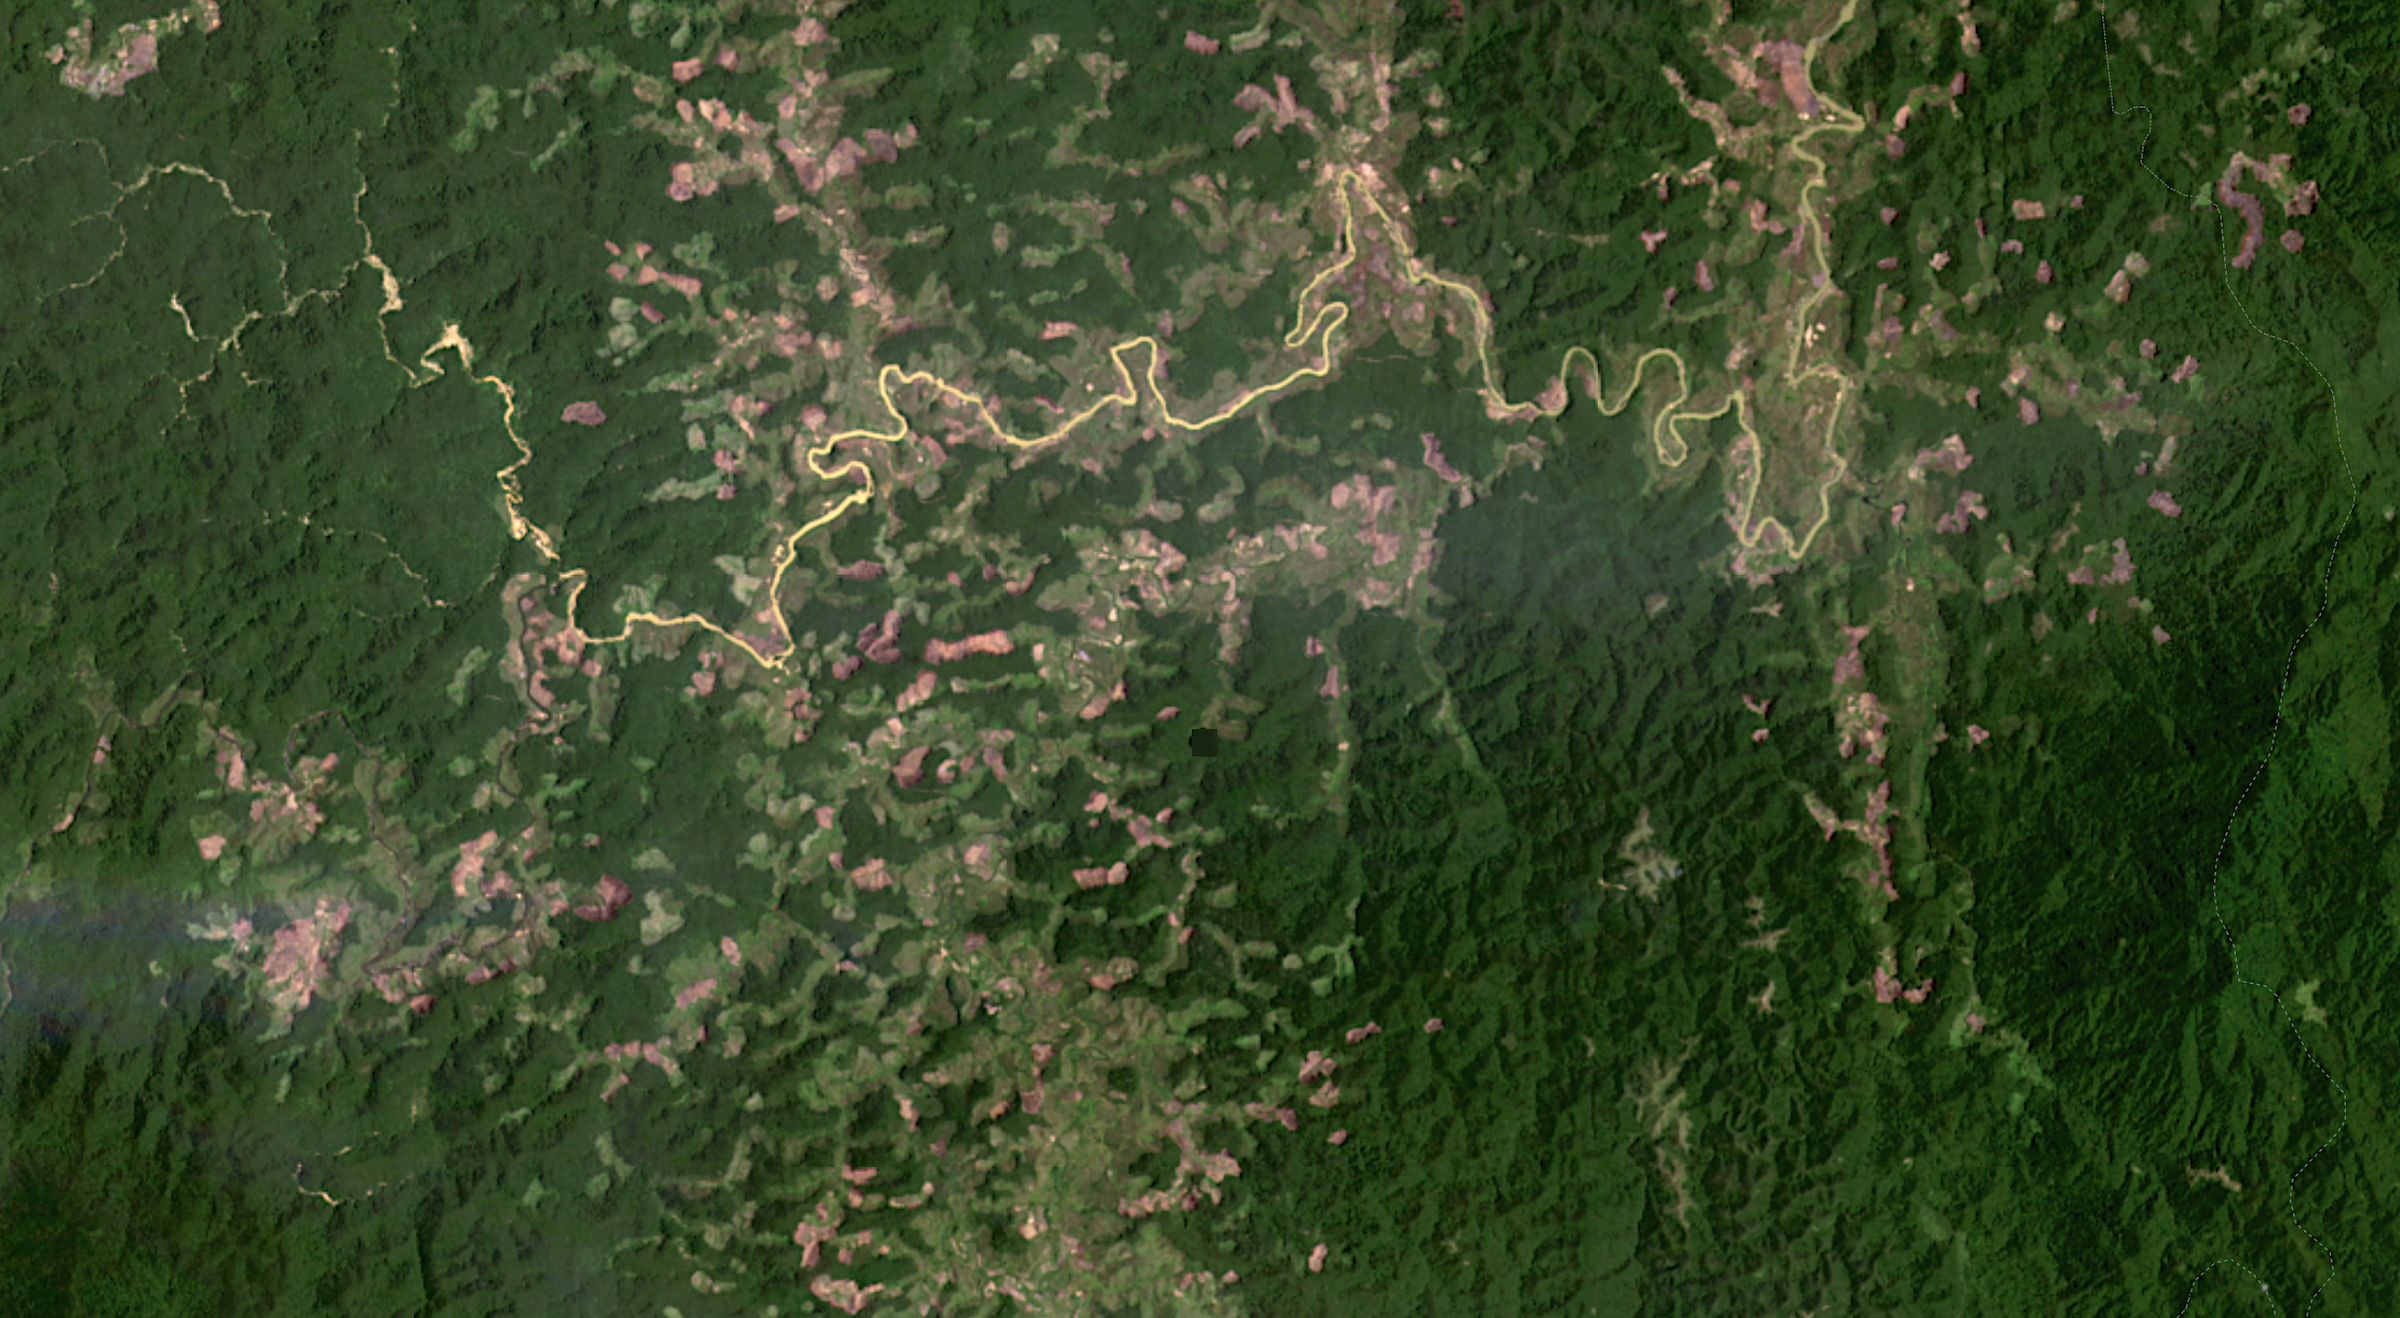 Satellite imagery captured in December 2020 shows many new clearings cutting into rainforest in CAZ. Image from Planet Labs.